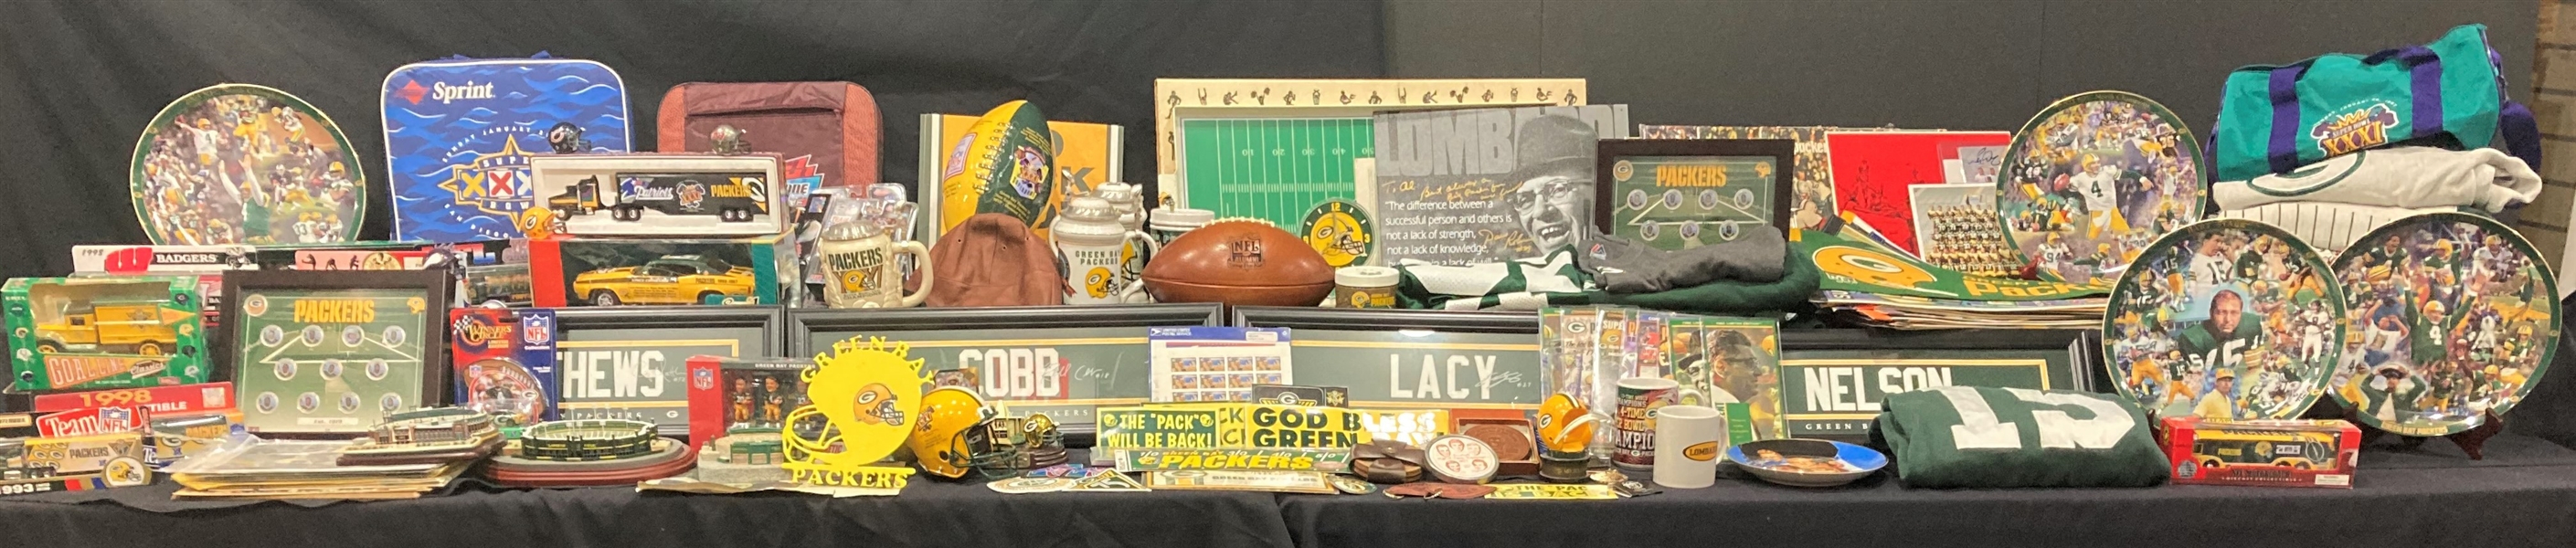 Lot of 75 + Green Bay Packers Memorabilia and Souvenirs